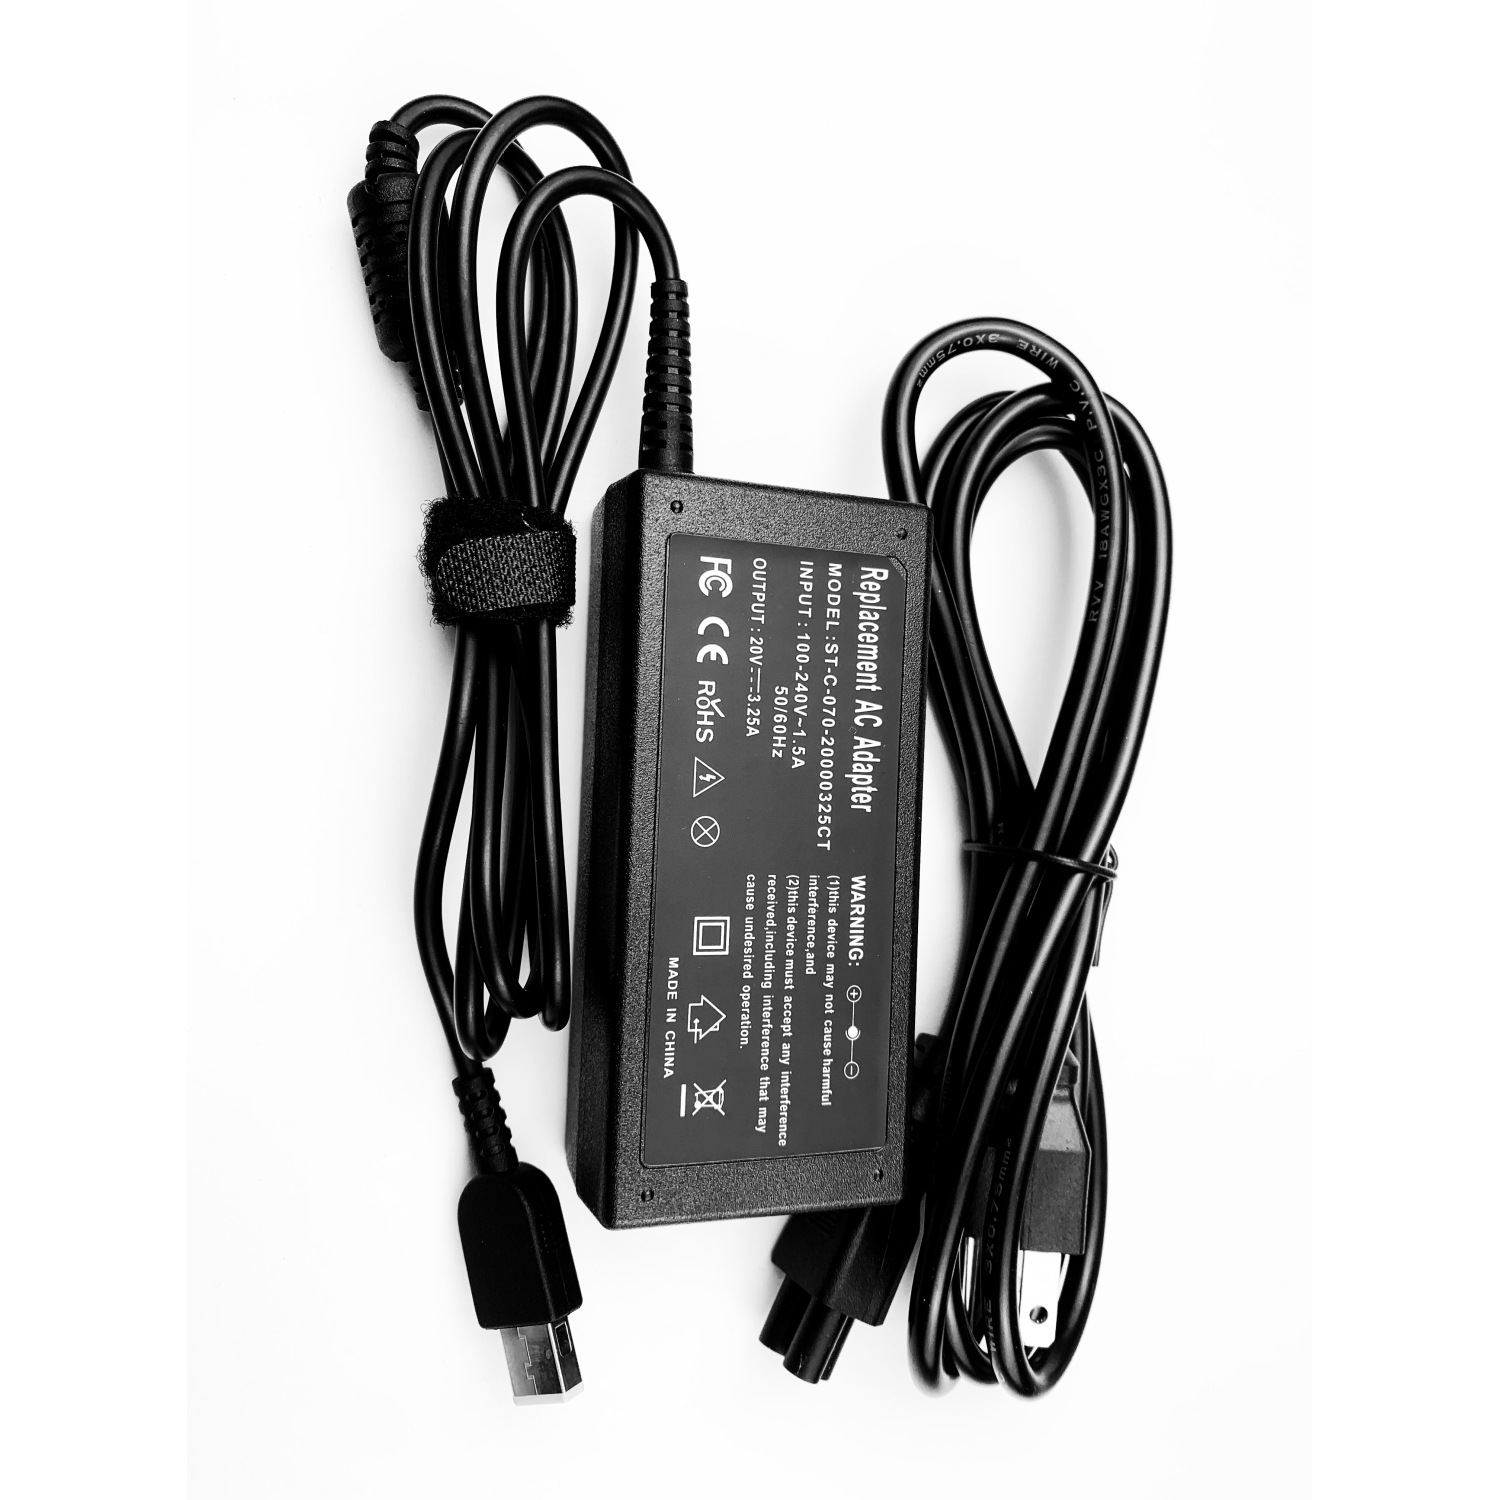 65W AC adapter charger for Lenovo Flex 15 15D i7 B50 i5-5200